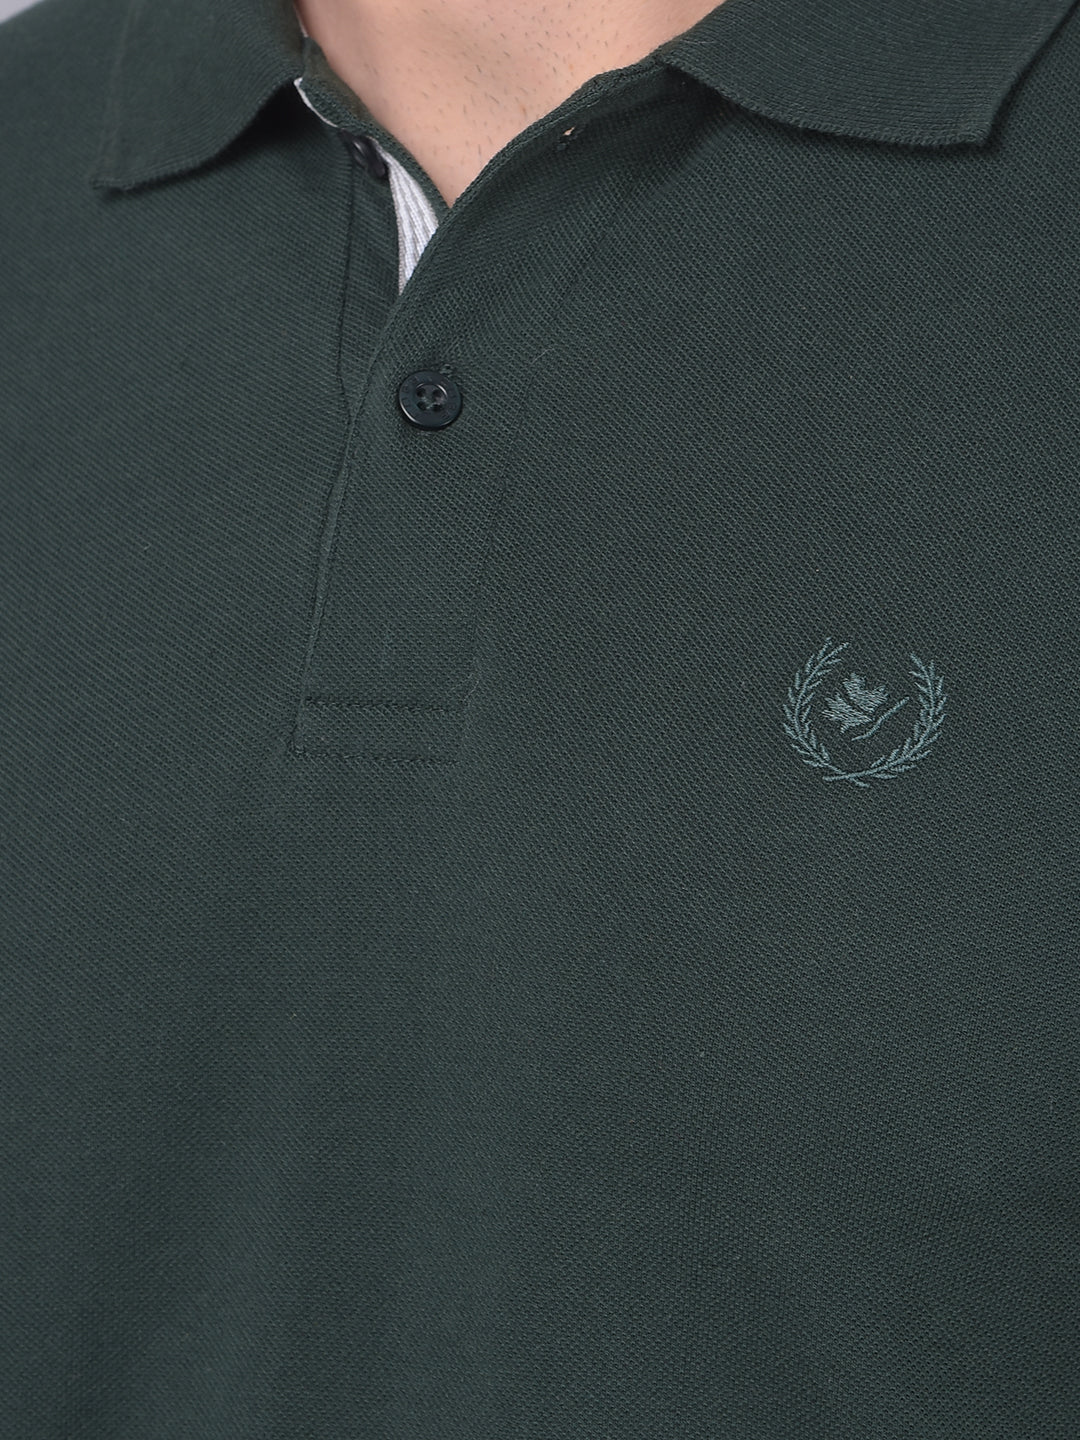 COBB SOLID BOTTLE GREEN POLO NECK T-SHIRT